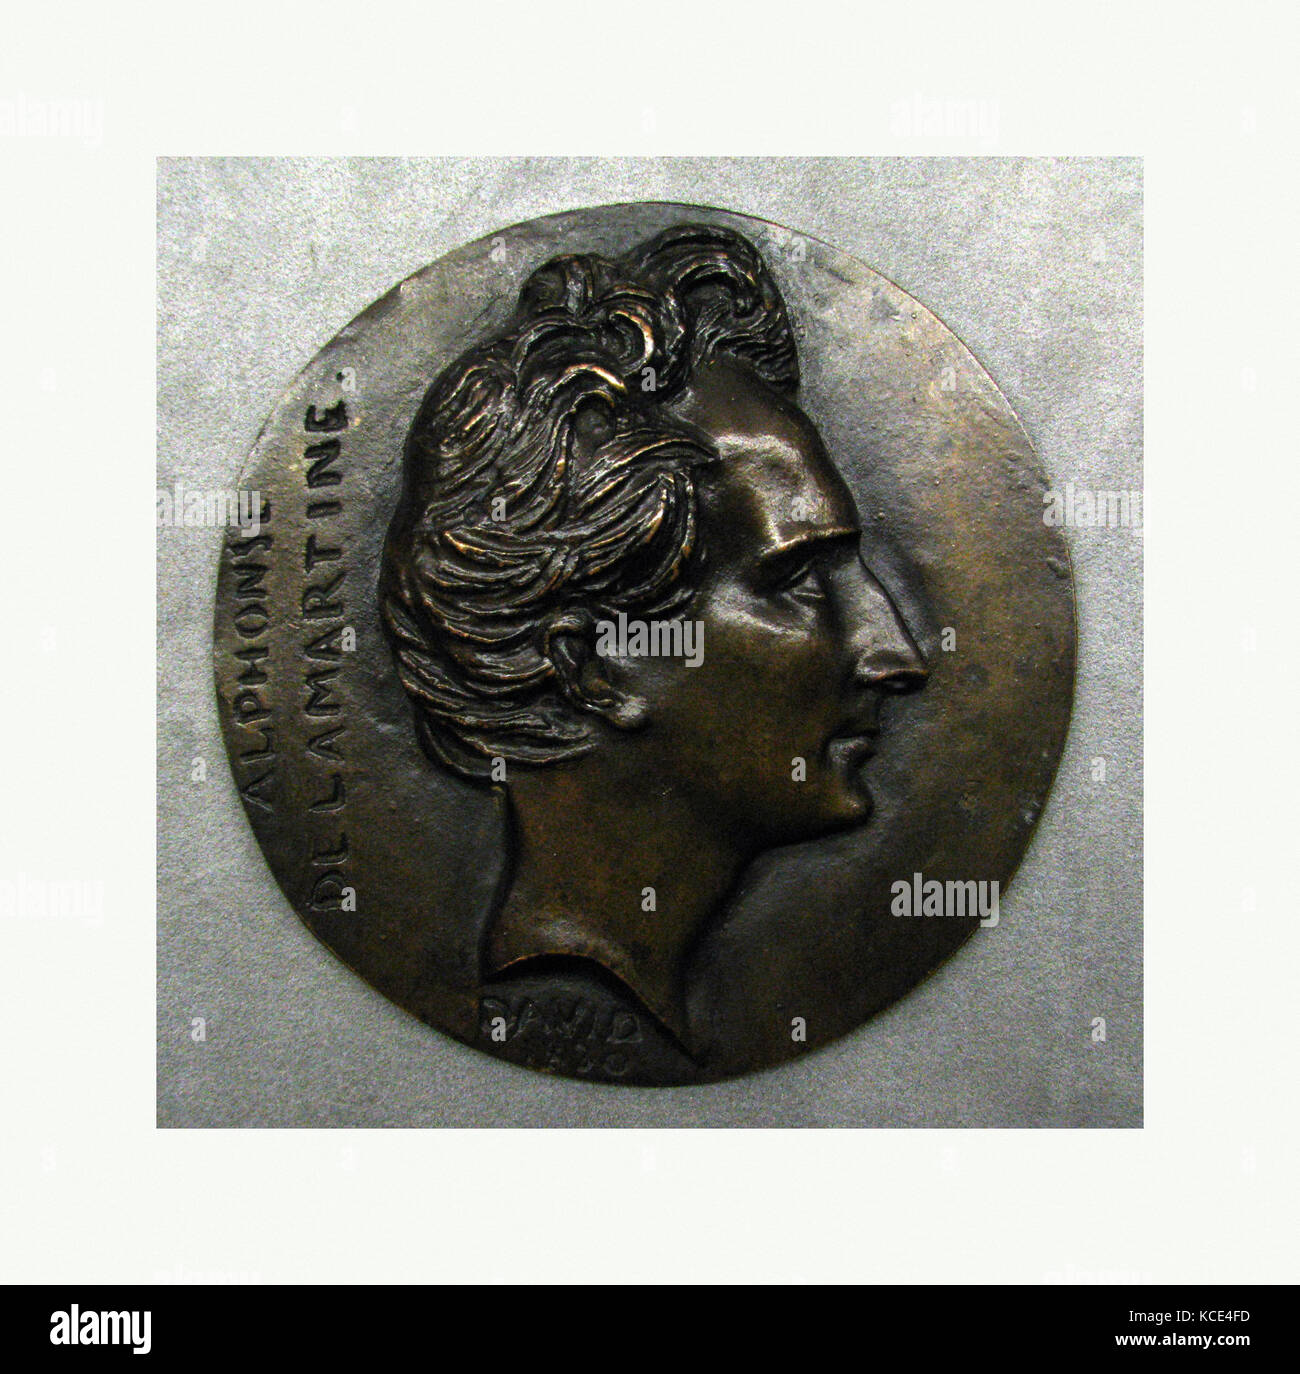 Alphonse de Lamartine, 1830, cast before 1856, French, Bronze, Overall: 5 3/8 x 5 1/4 in. (13.7 x 13.3 cm), Medals and Plaquette Stock Photo